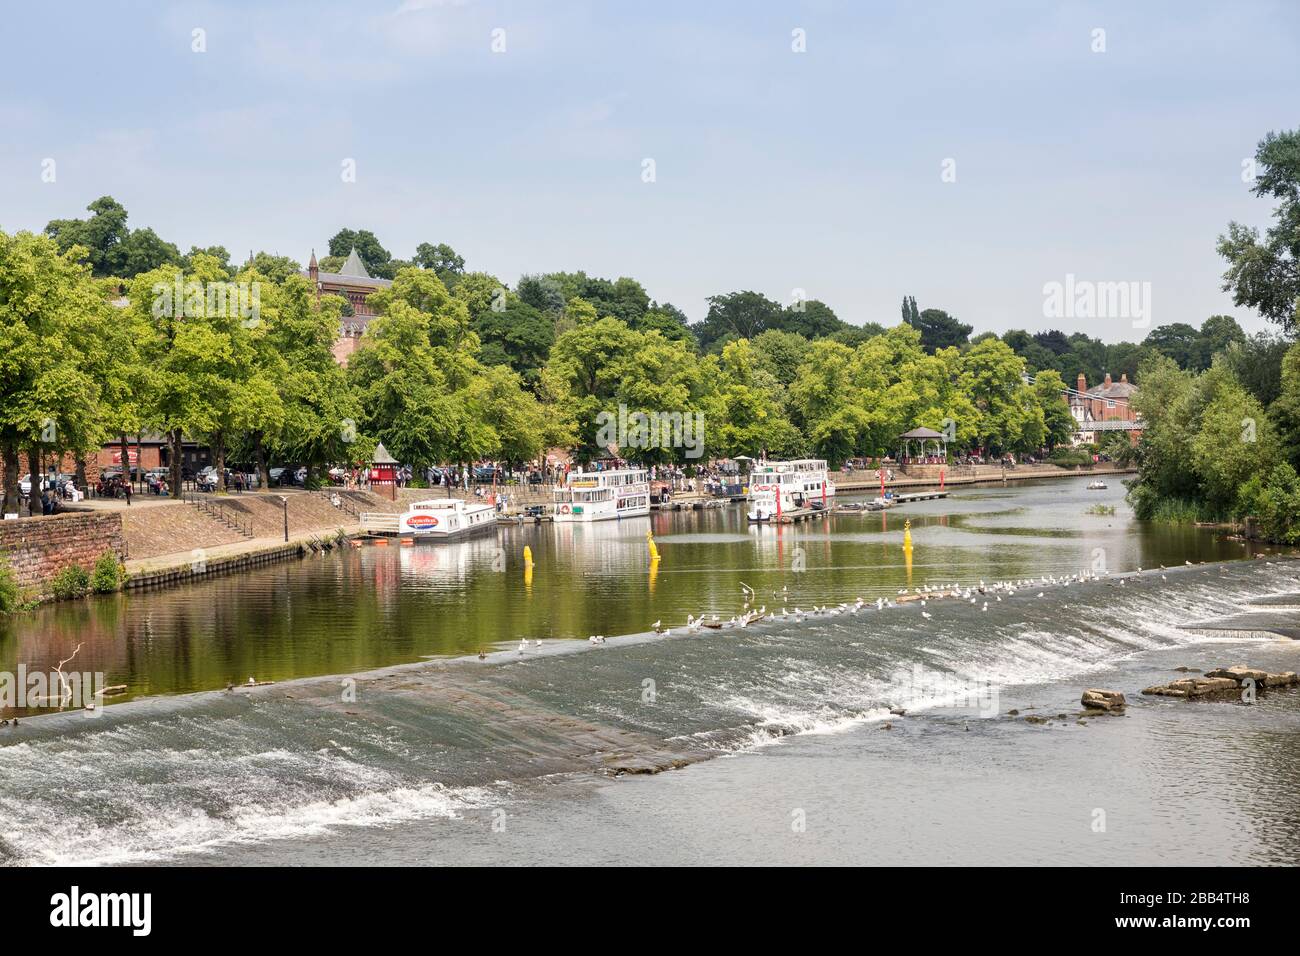 Weir and tourist sightseeing boats on the river Dee, Chester, Cheshire, England, UK Stock Photo